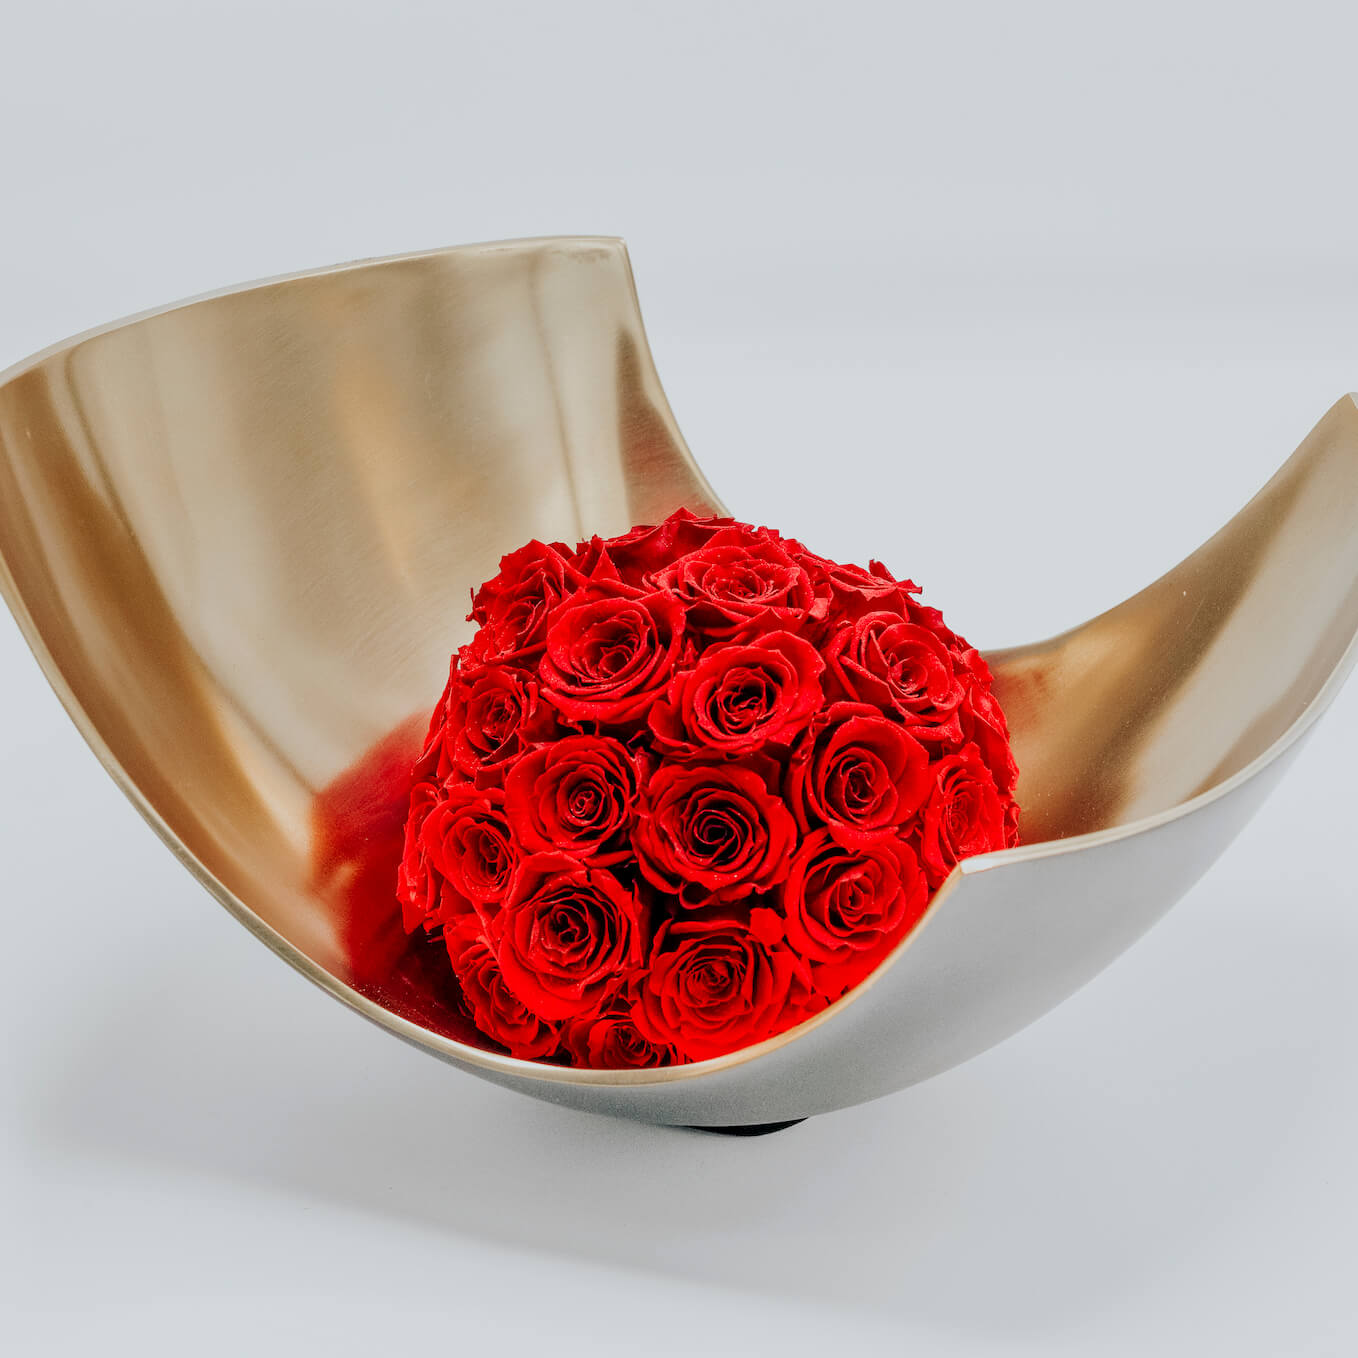 ASYMMETRIC CURVY GOLD MEDIUM VASE WITH PETITE RED PRESERVED FLOWERS SPHERE - LUNA COLLECTION